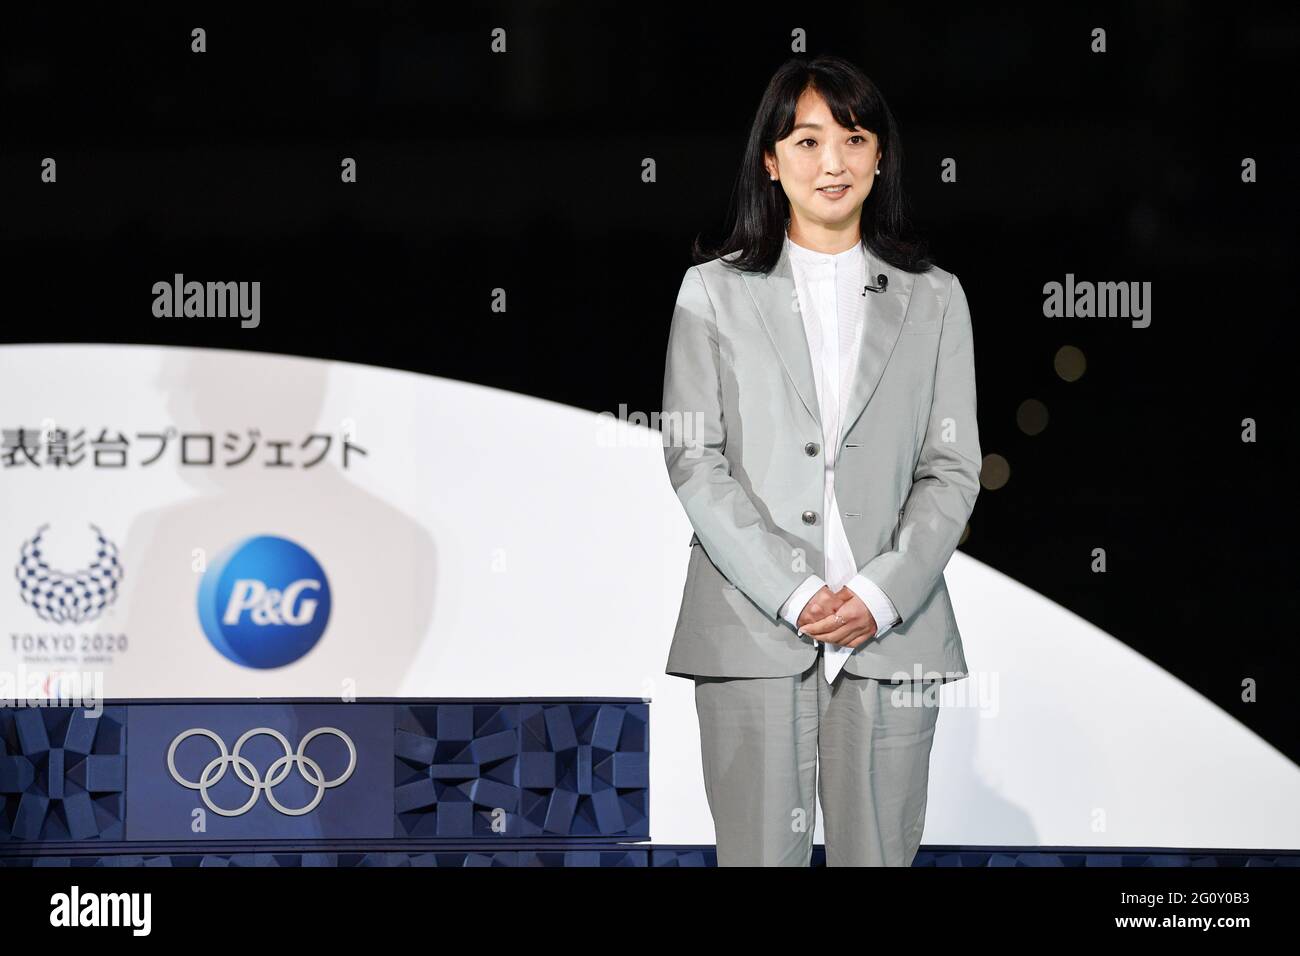 Tokyo, Japan. June 3 2021: Kyoko Iwasaki, JUNE 3, 2021 : The Tokyo Organising Committee of the Olympic and Paralympic Games (Tokyo 2020) unveil the items that will be used during Victory Ceremonies at the Tokyo 2020 Games, at Ariake Arena in Tokyo, Japan. The items include the Podium, Costume, Music which will be played at the Victory Ceremonies and the Medal Tray. Credit: MATSUO.K/AFLO SPORT/Alamy Live News Credit: Aflo Co. Ltd./Alamy Live News Stock Photo